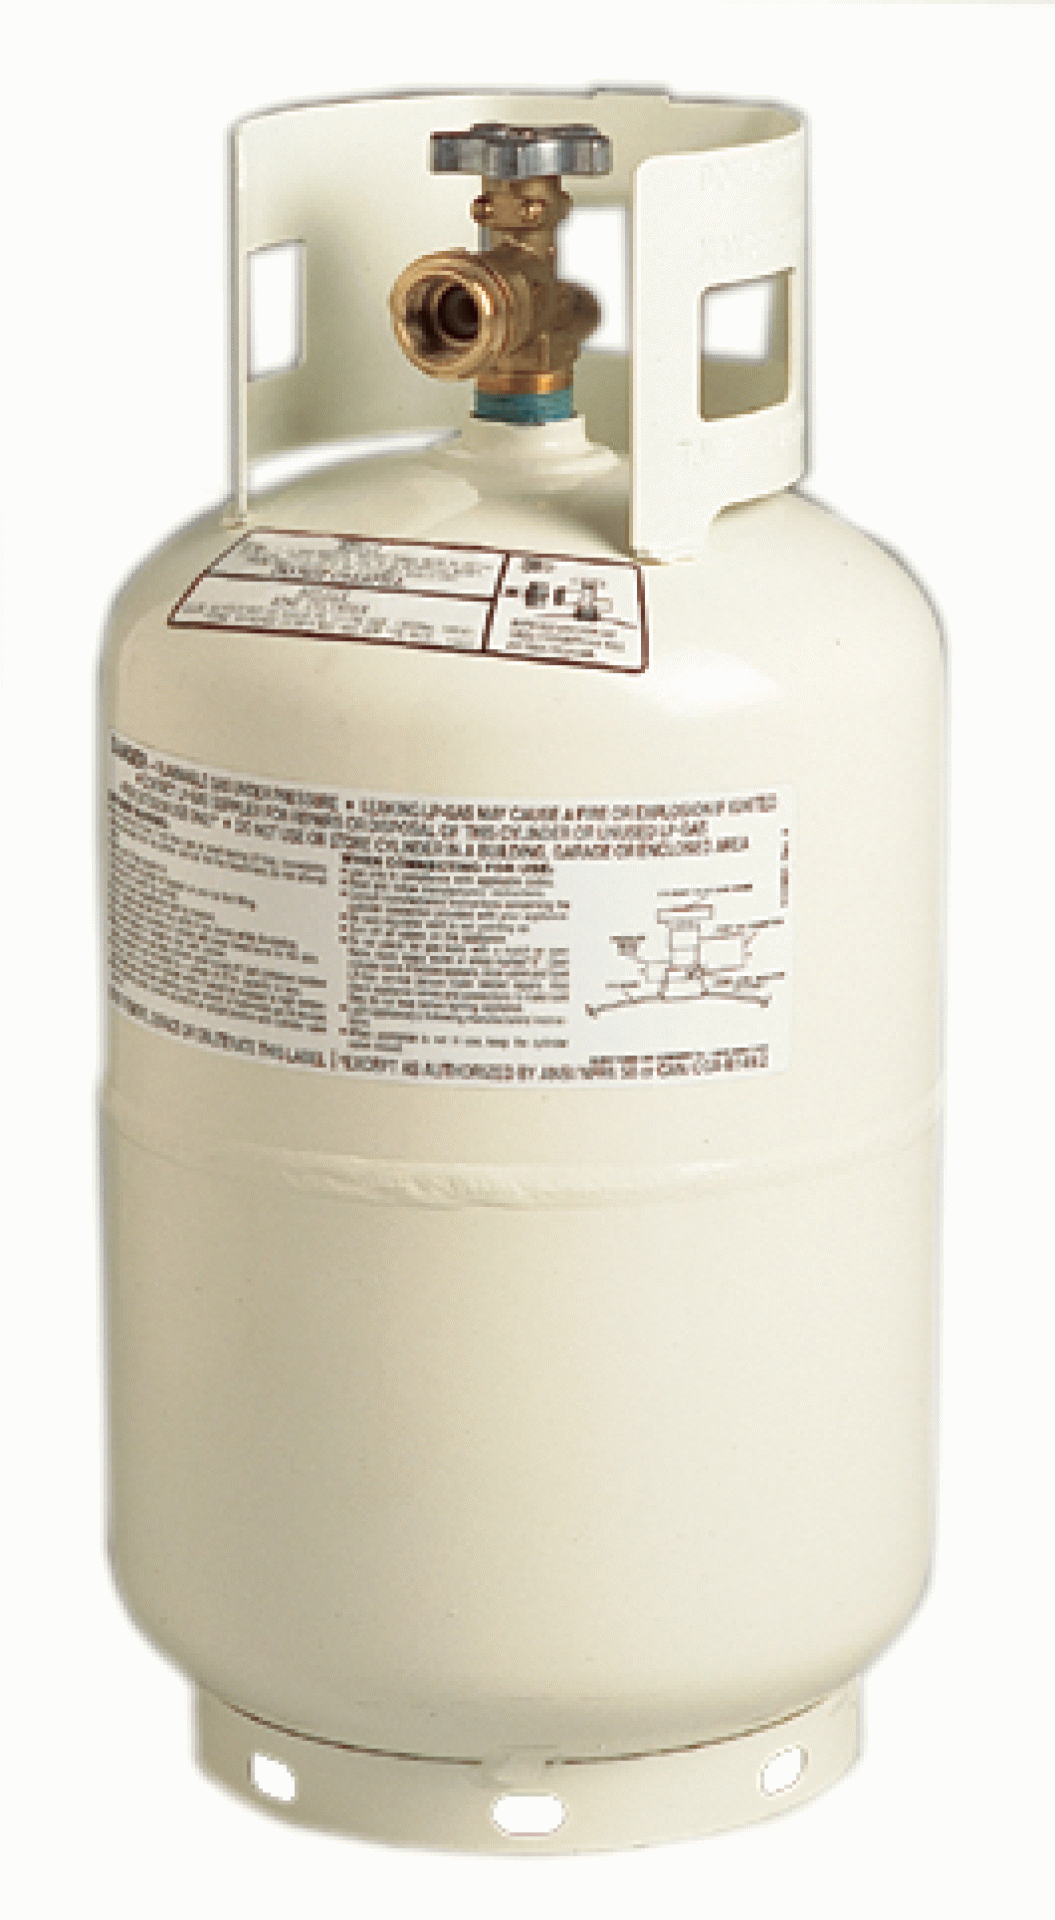 MANCHESTER TANK & EQUIPM | 10228TCTH.4 | LP GAS CYLINDER - 10 LB (OUTAGE VALVE)